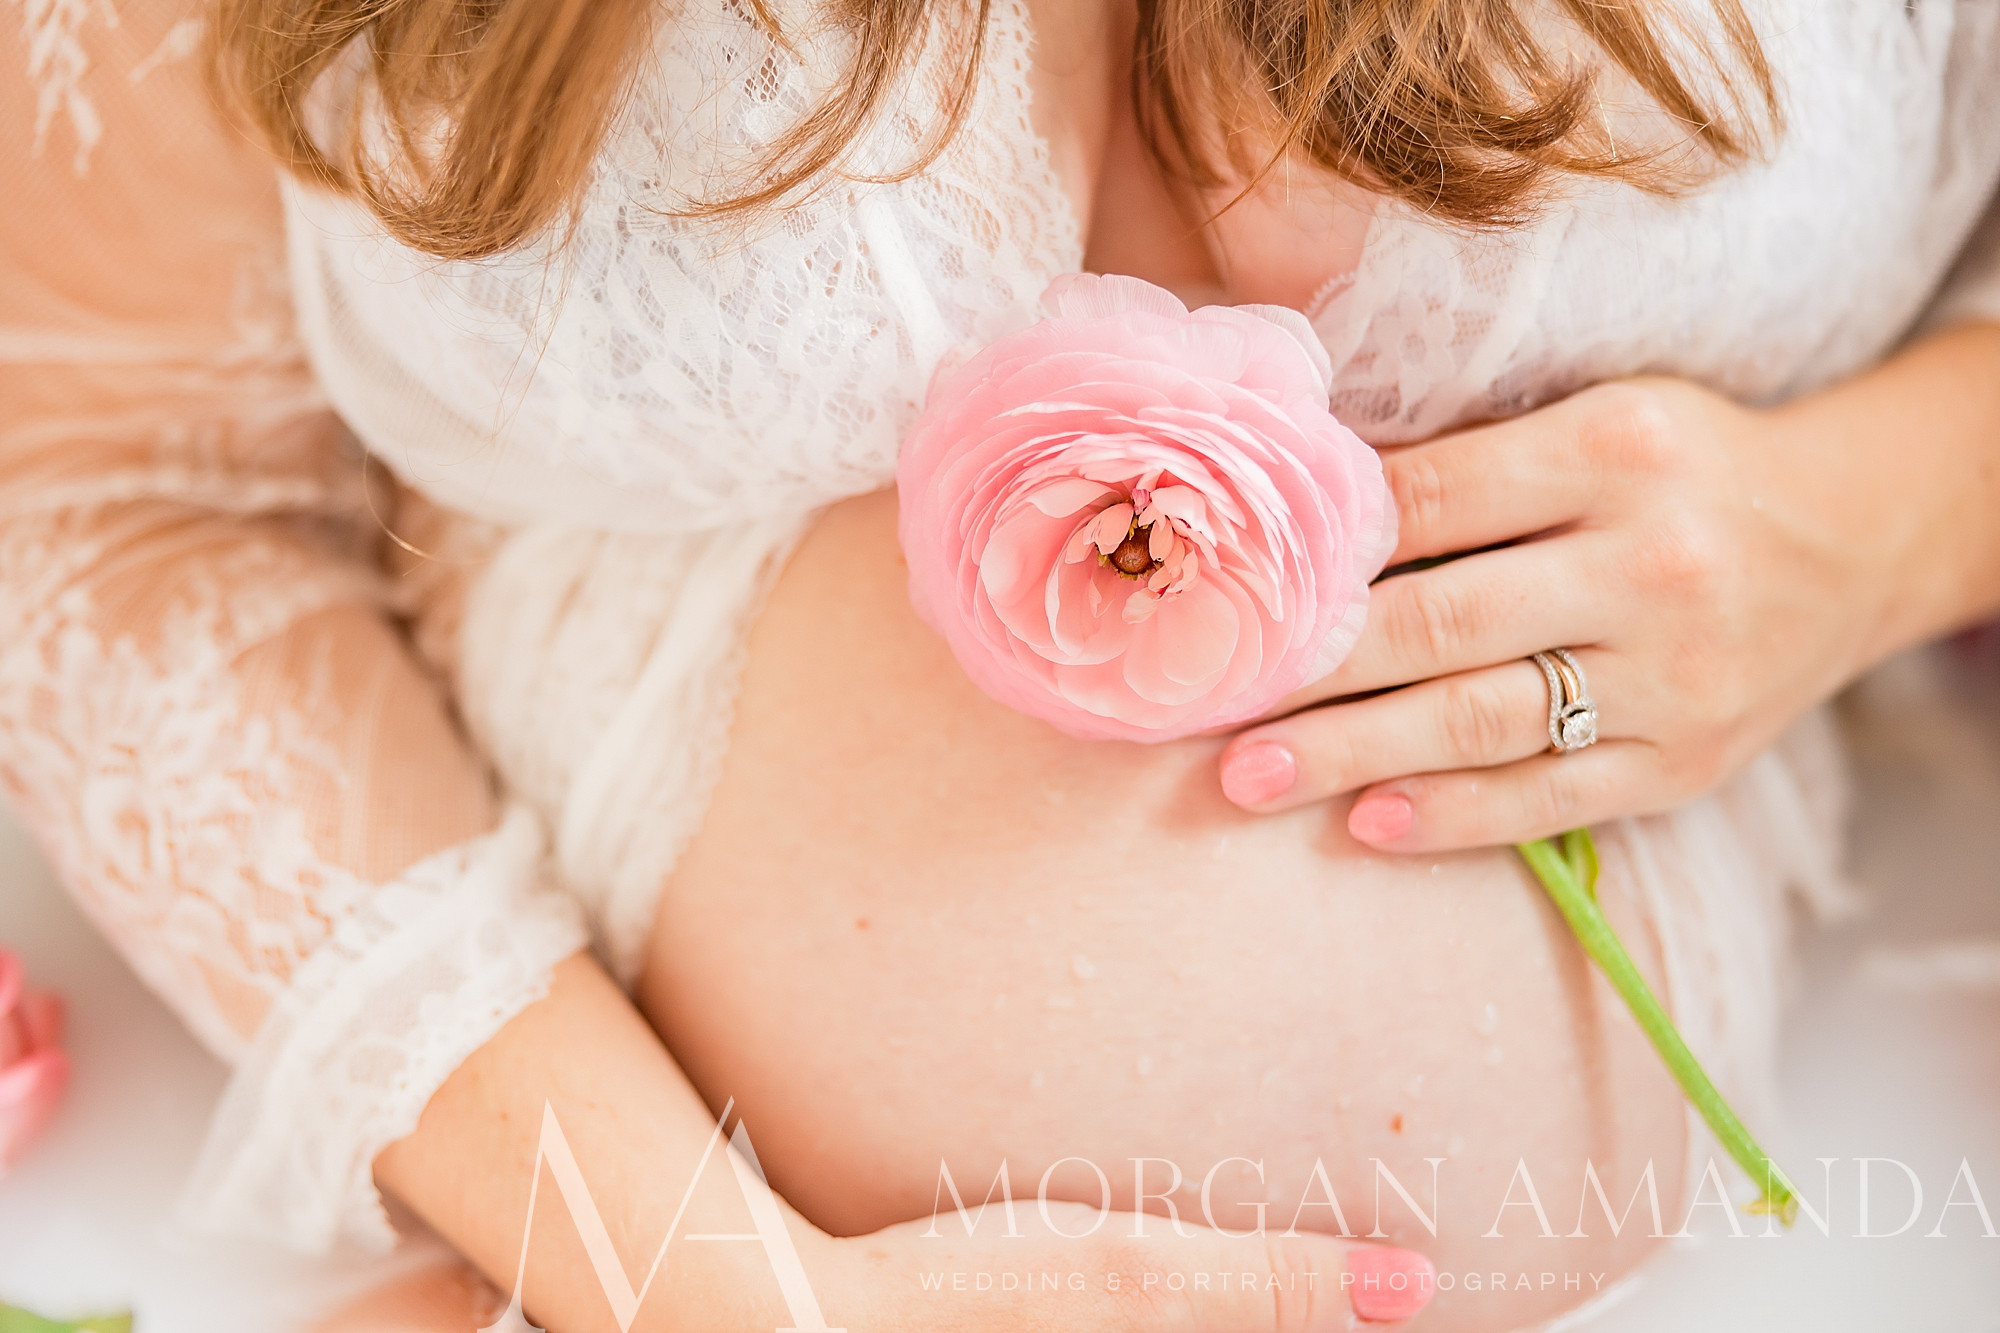 mom holds pink rose by tummy during maternity photos in tub